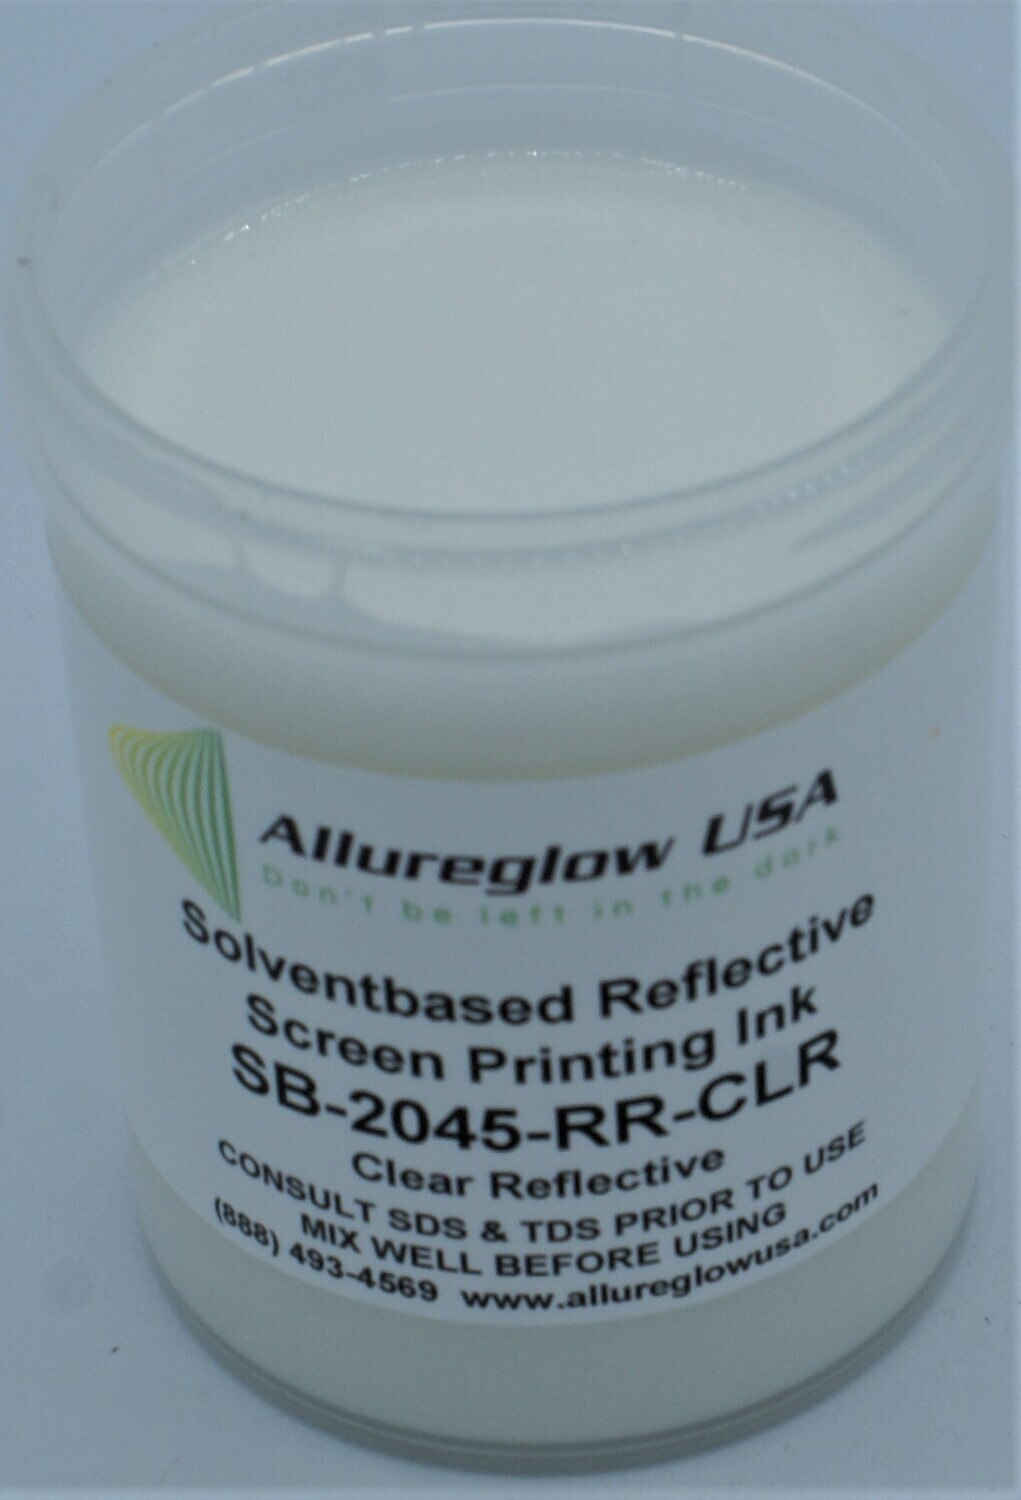 SB-2045-RR-CLR-GL SOLVENT BASED CLEAR REFLECTIVE SCREEN PRINTING INK - GALLON